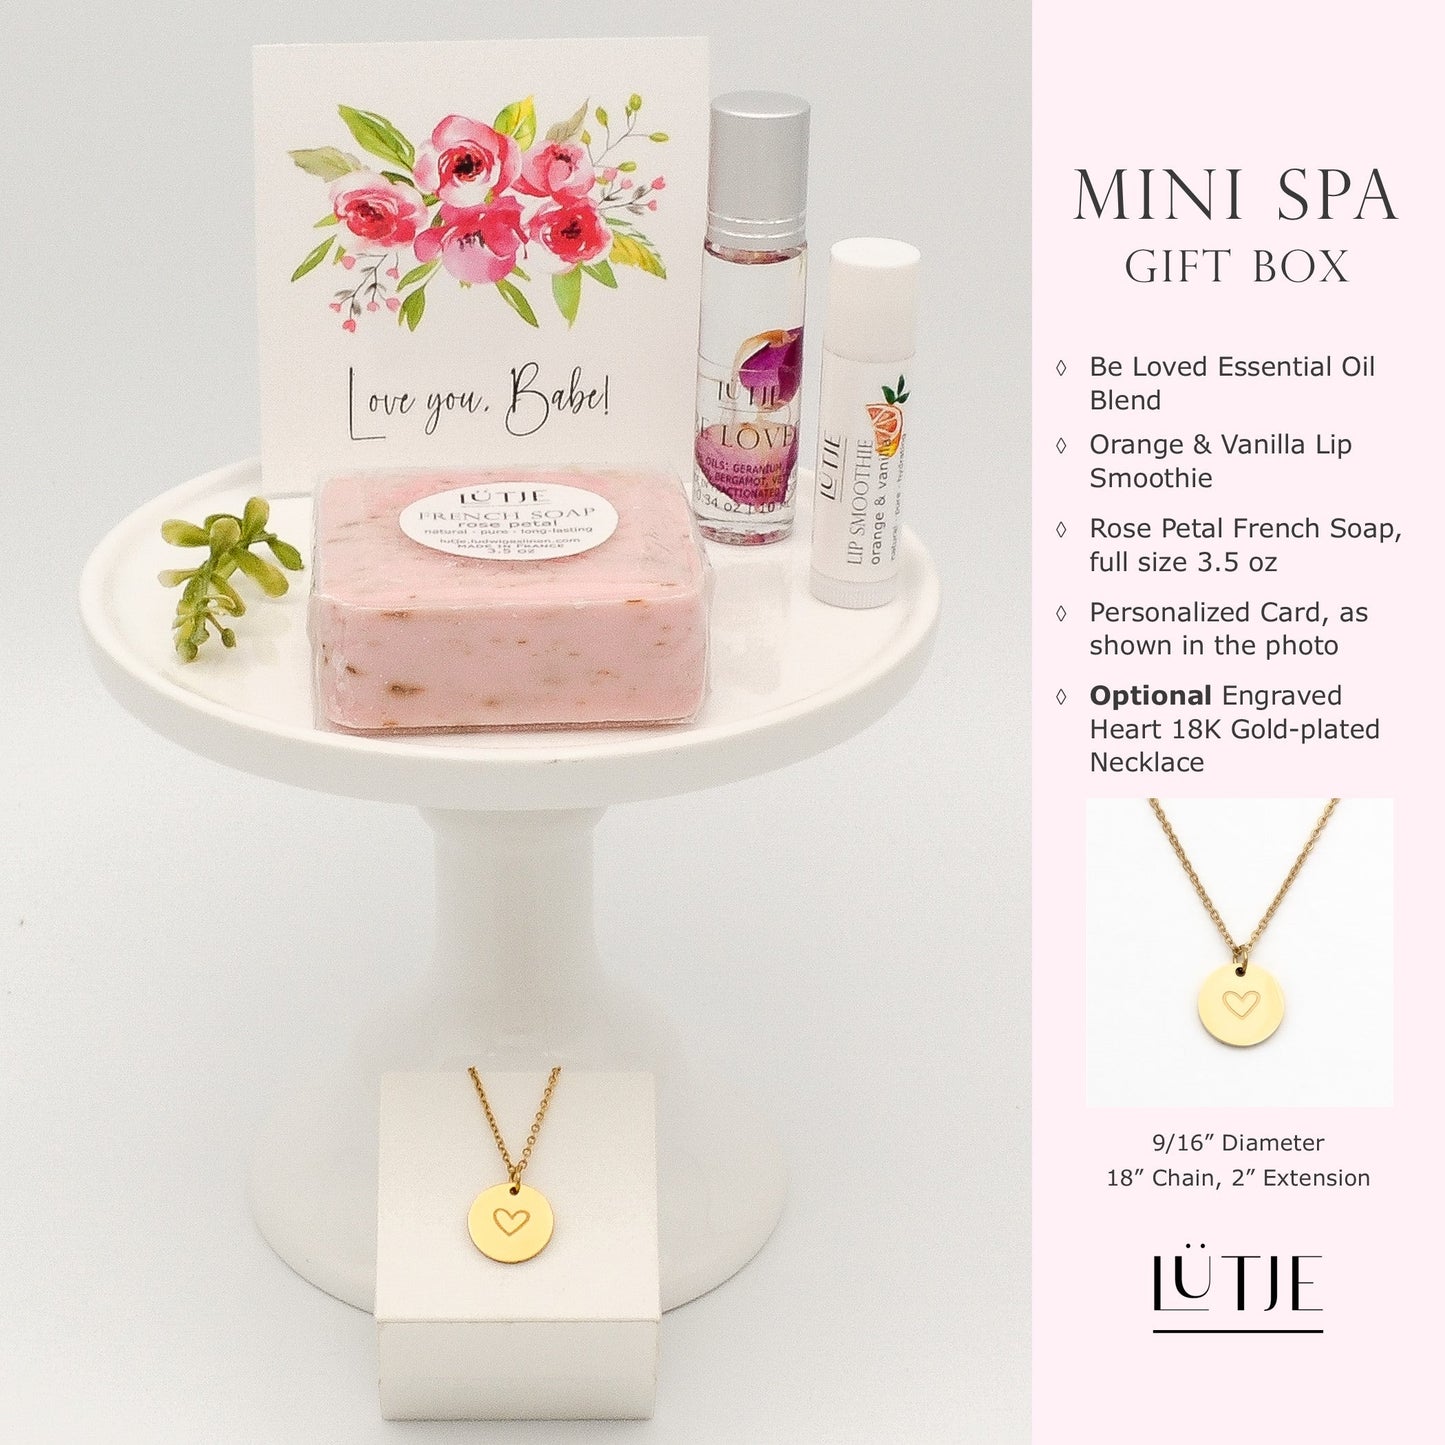 Mini Spa Gift Box for women, sister, daughter, mom, BFF, wife or grandma, includes essential oil, French soap, lip balm, and optional 18K gold-plated necklace with engraved heart.